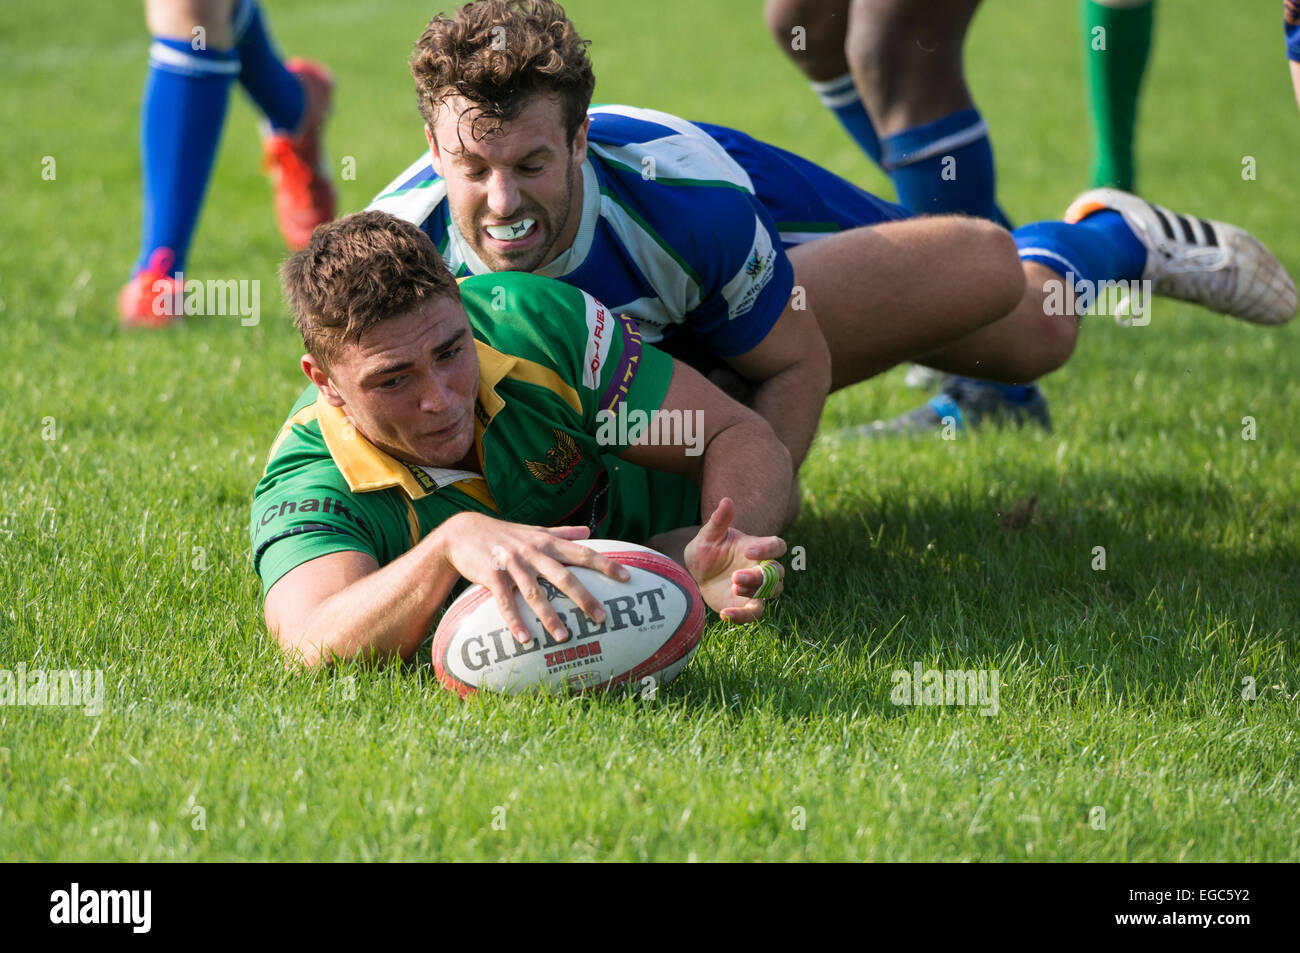 NDRFC Rugby player scoring try. Stock Photo